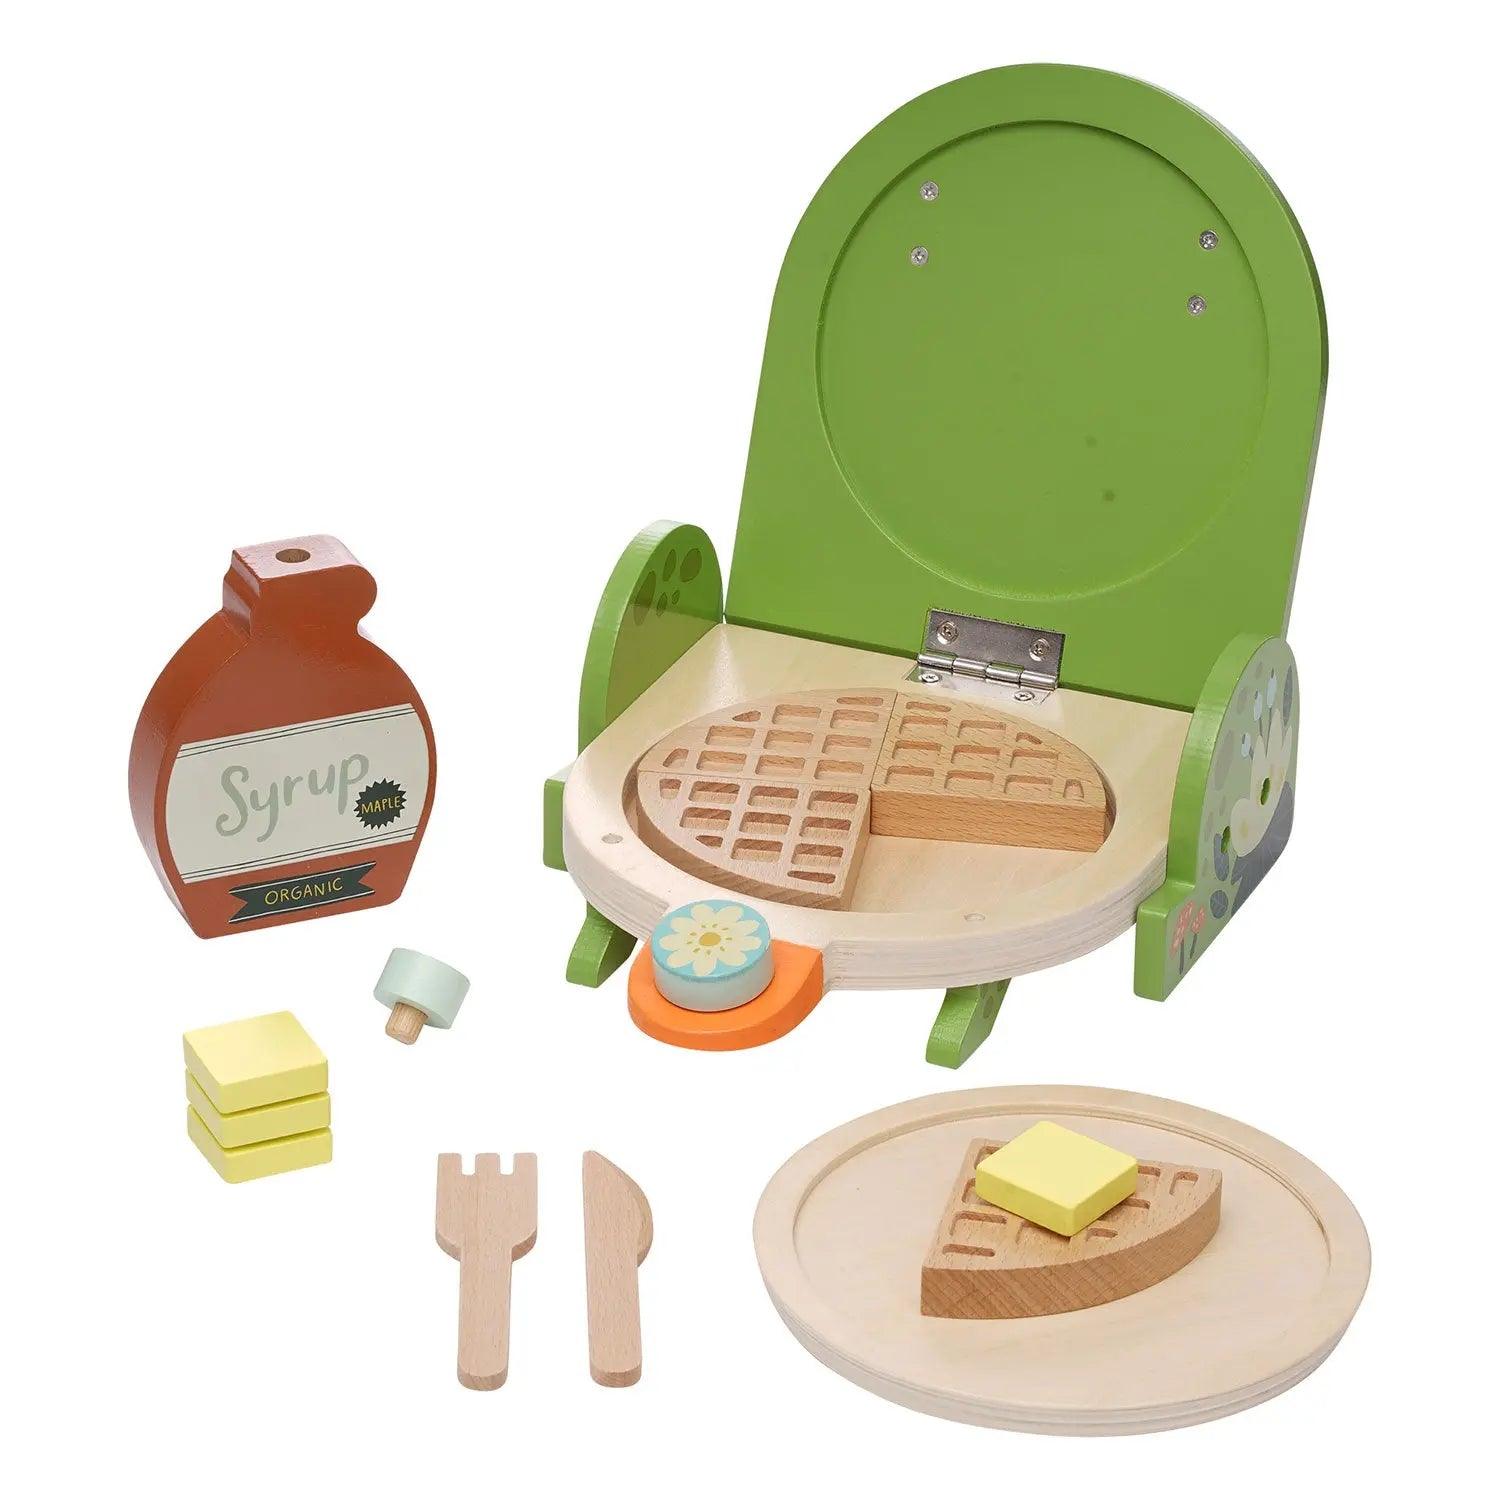 Ribbit Waffle Maker - Why and Whale